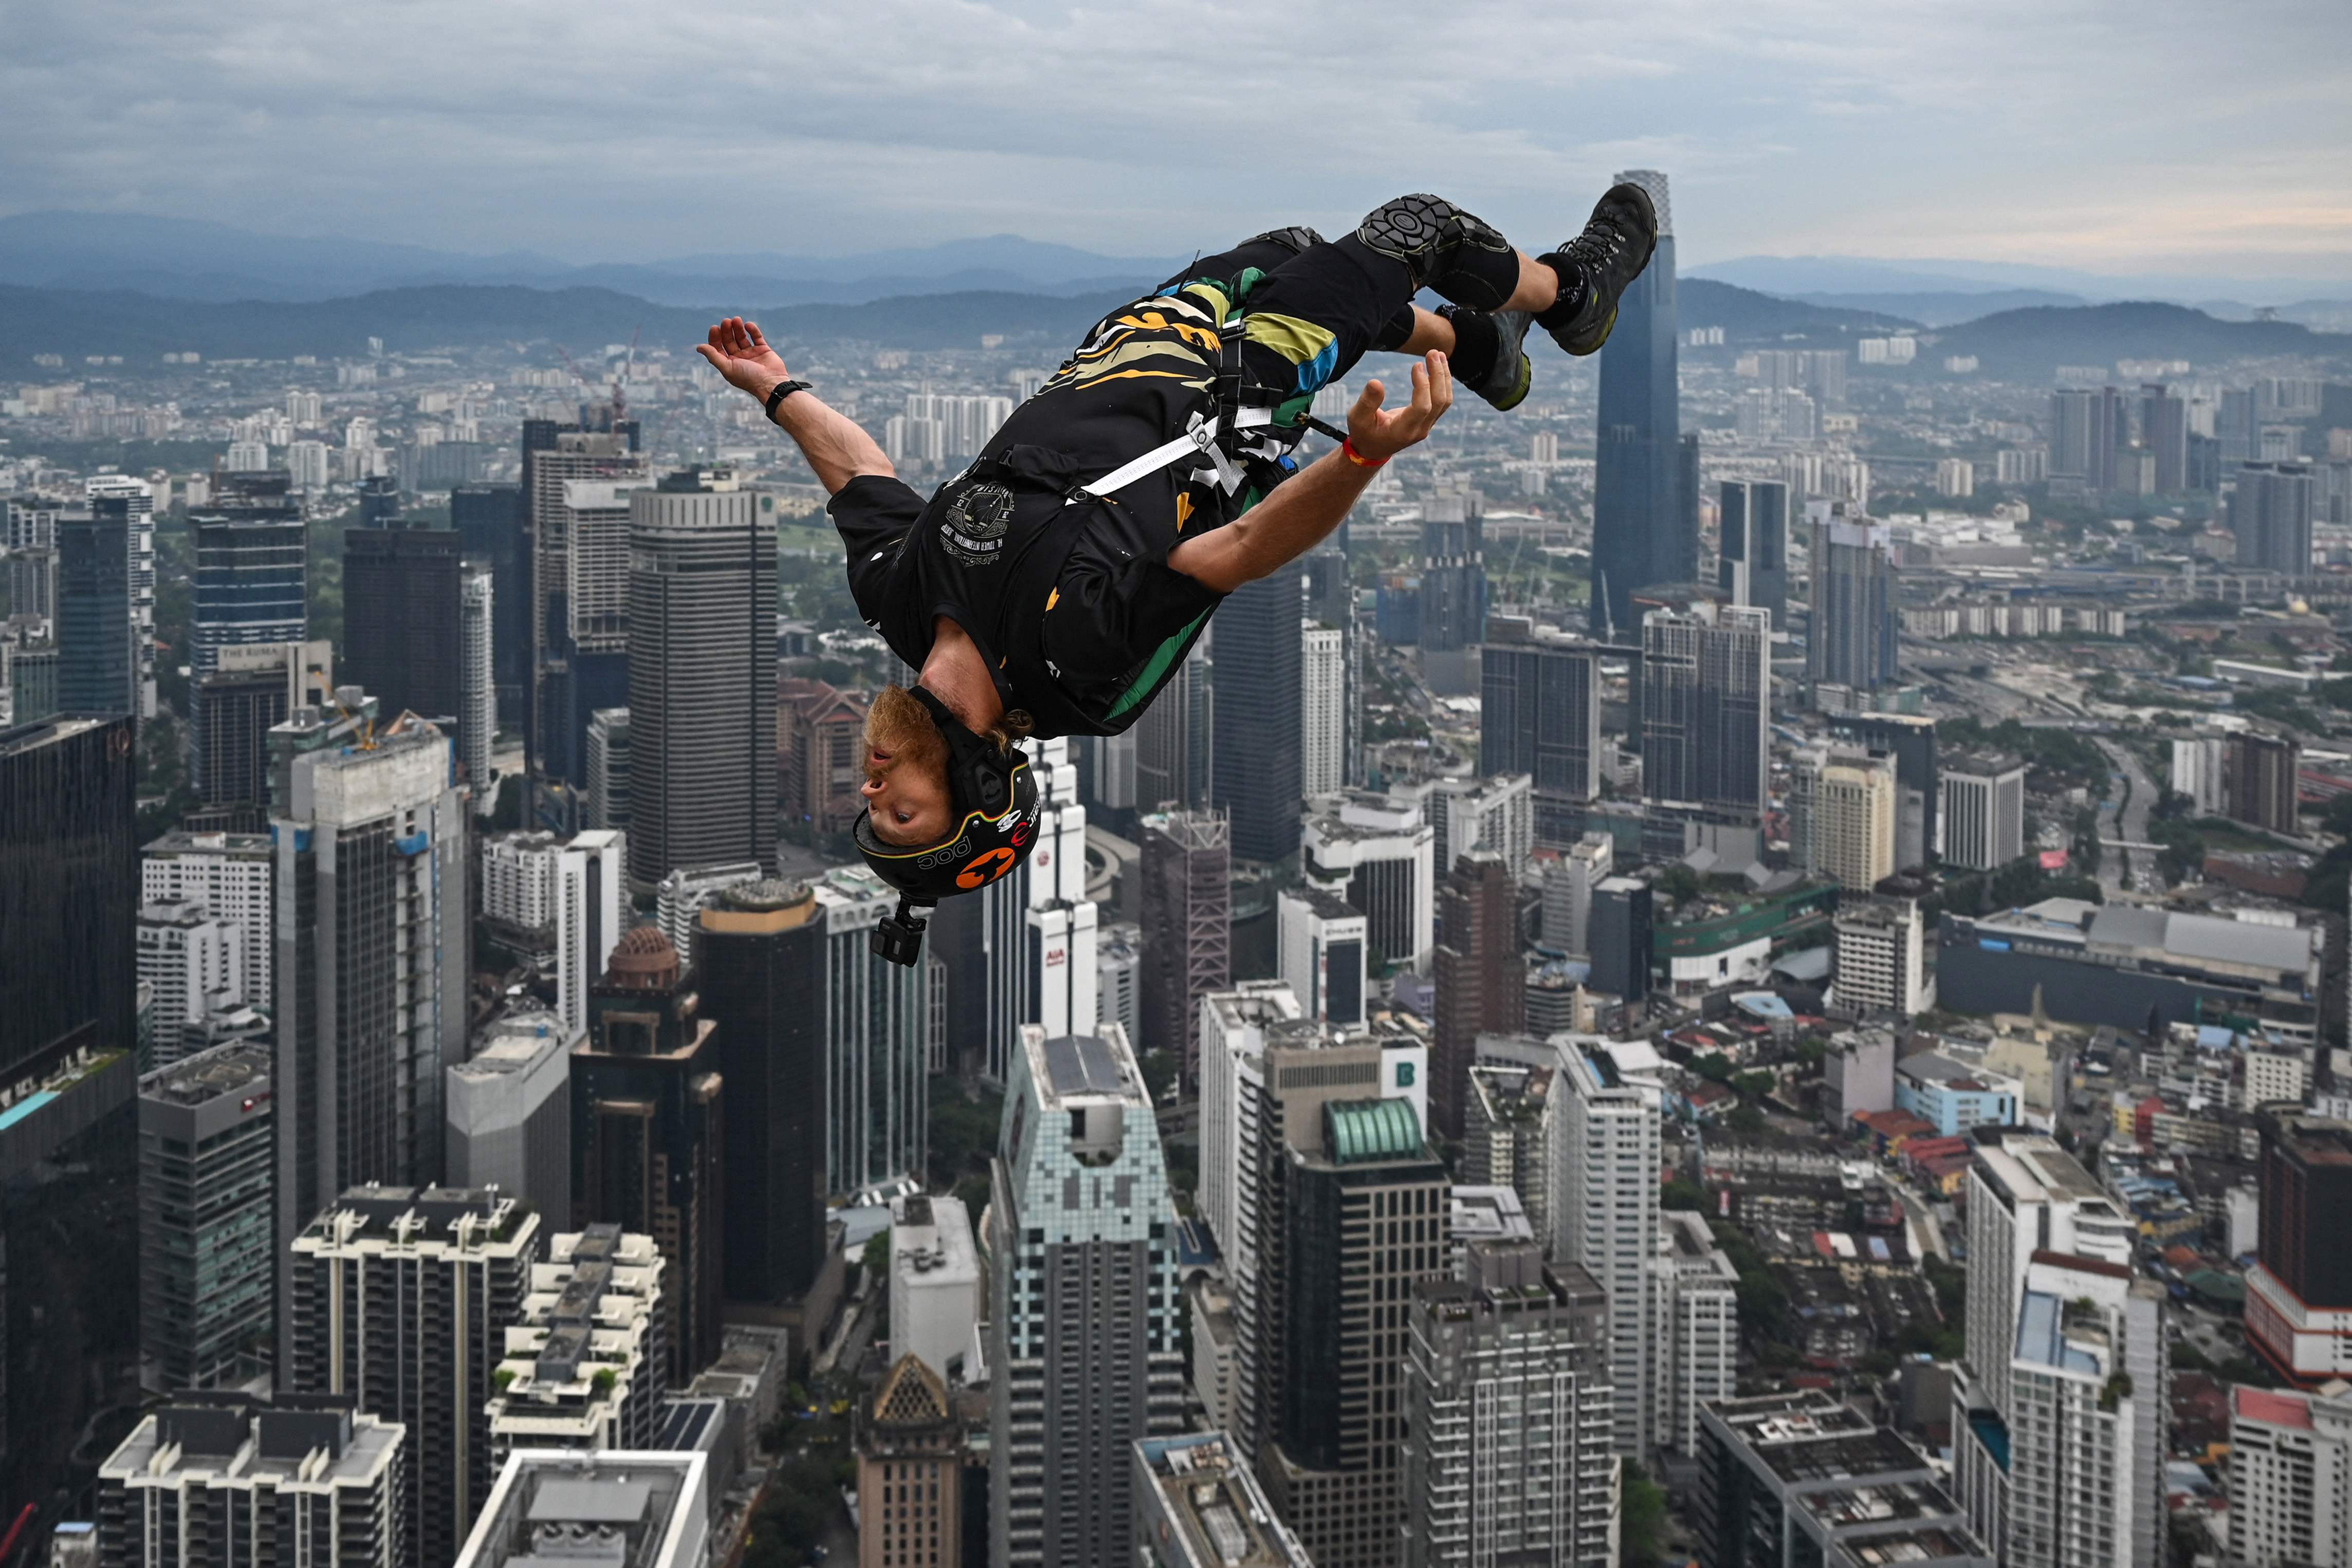 Base jumper Connor Young of Australia leaps from the 300-metre high open deck of Malaysia's landmark Kuala Lumpur Tower during the International Tower Jump in Kuala Lumpur